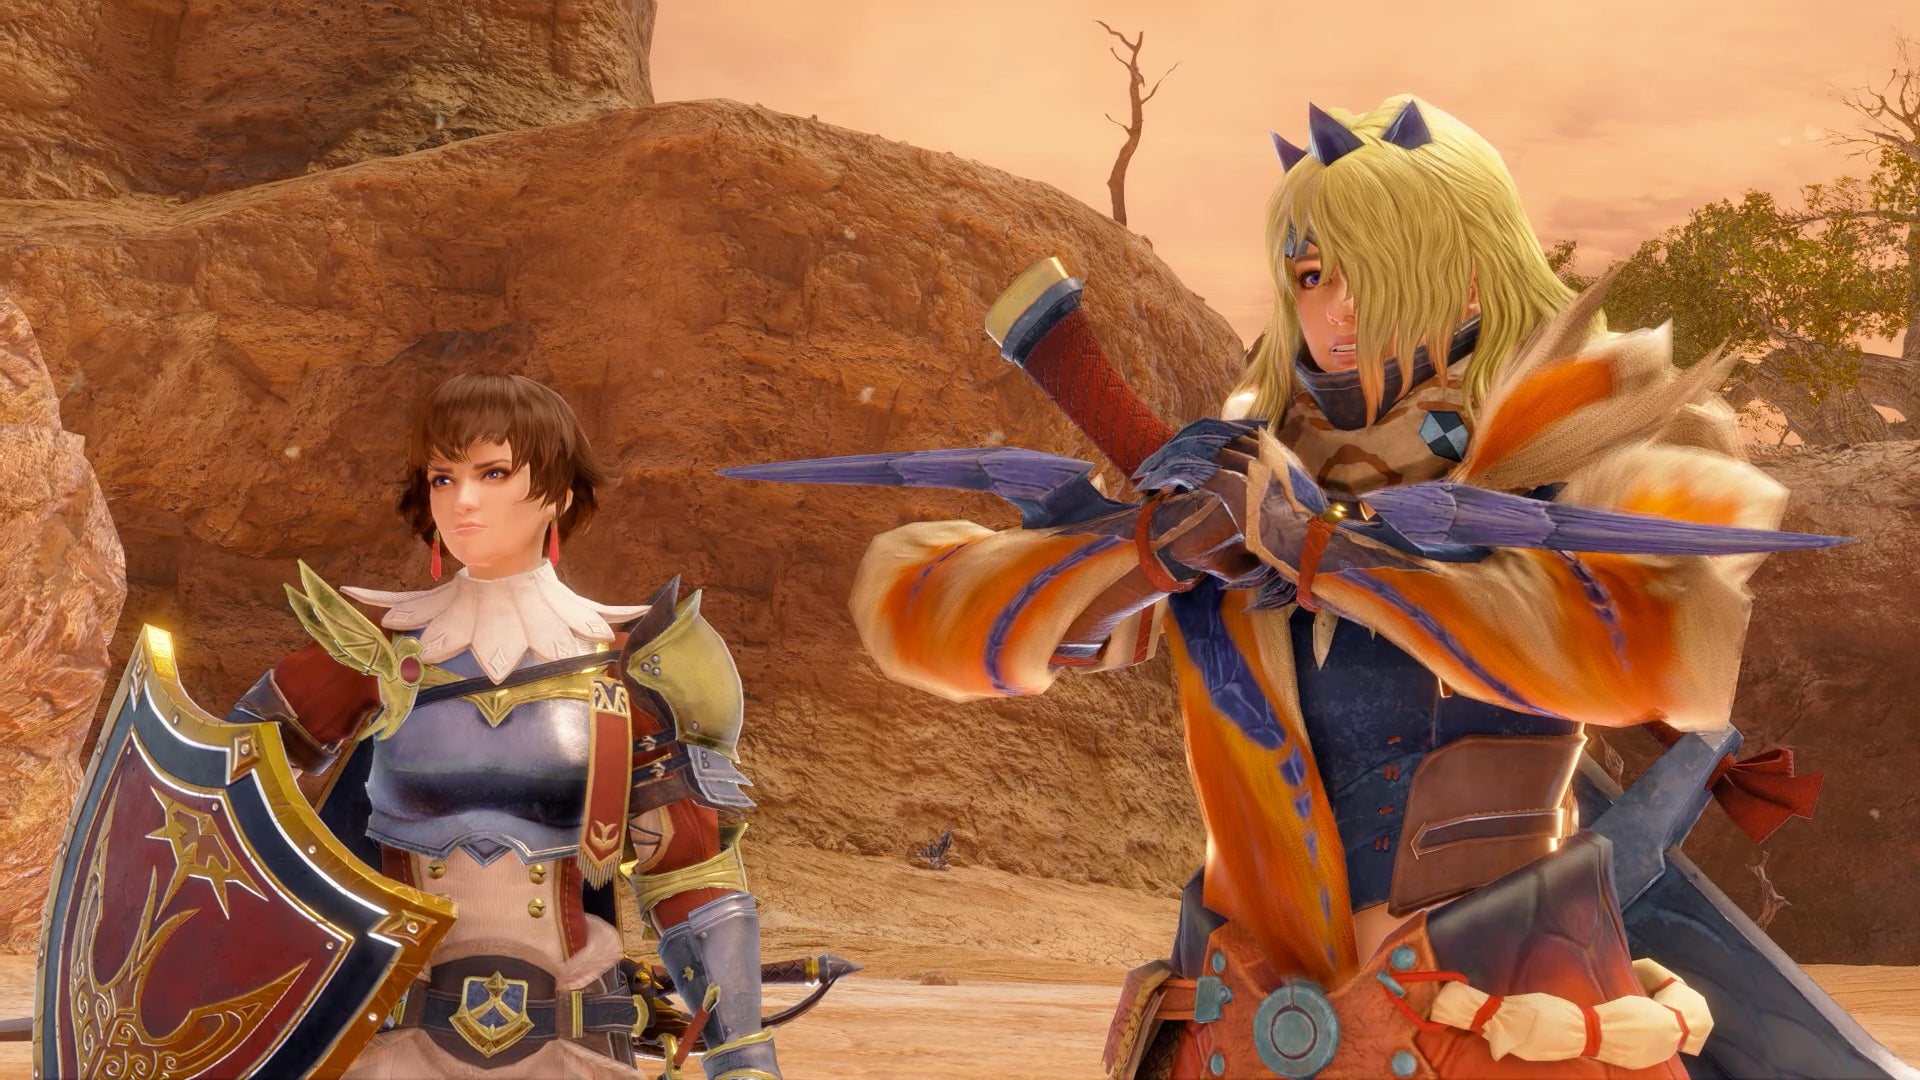 A hunter poses in victory while stood next to Fiorayne, a knight, in Monster Hunter Rise: Sunbreak